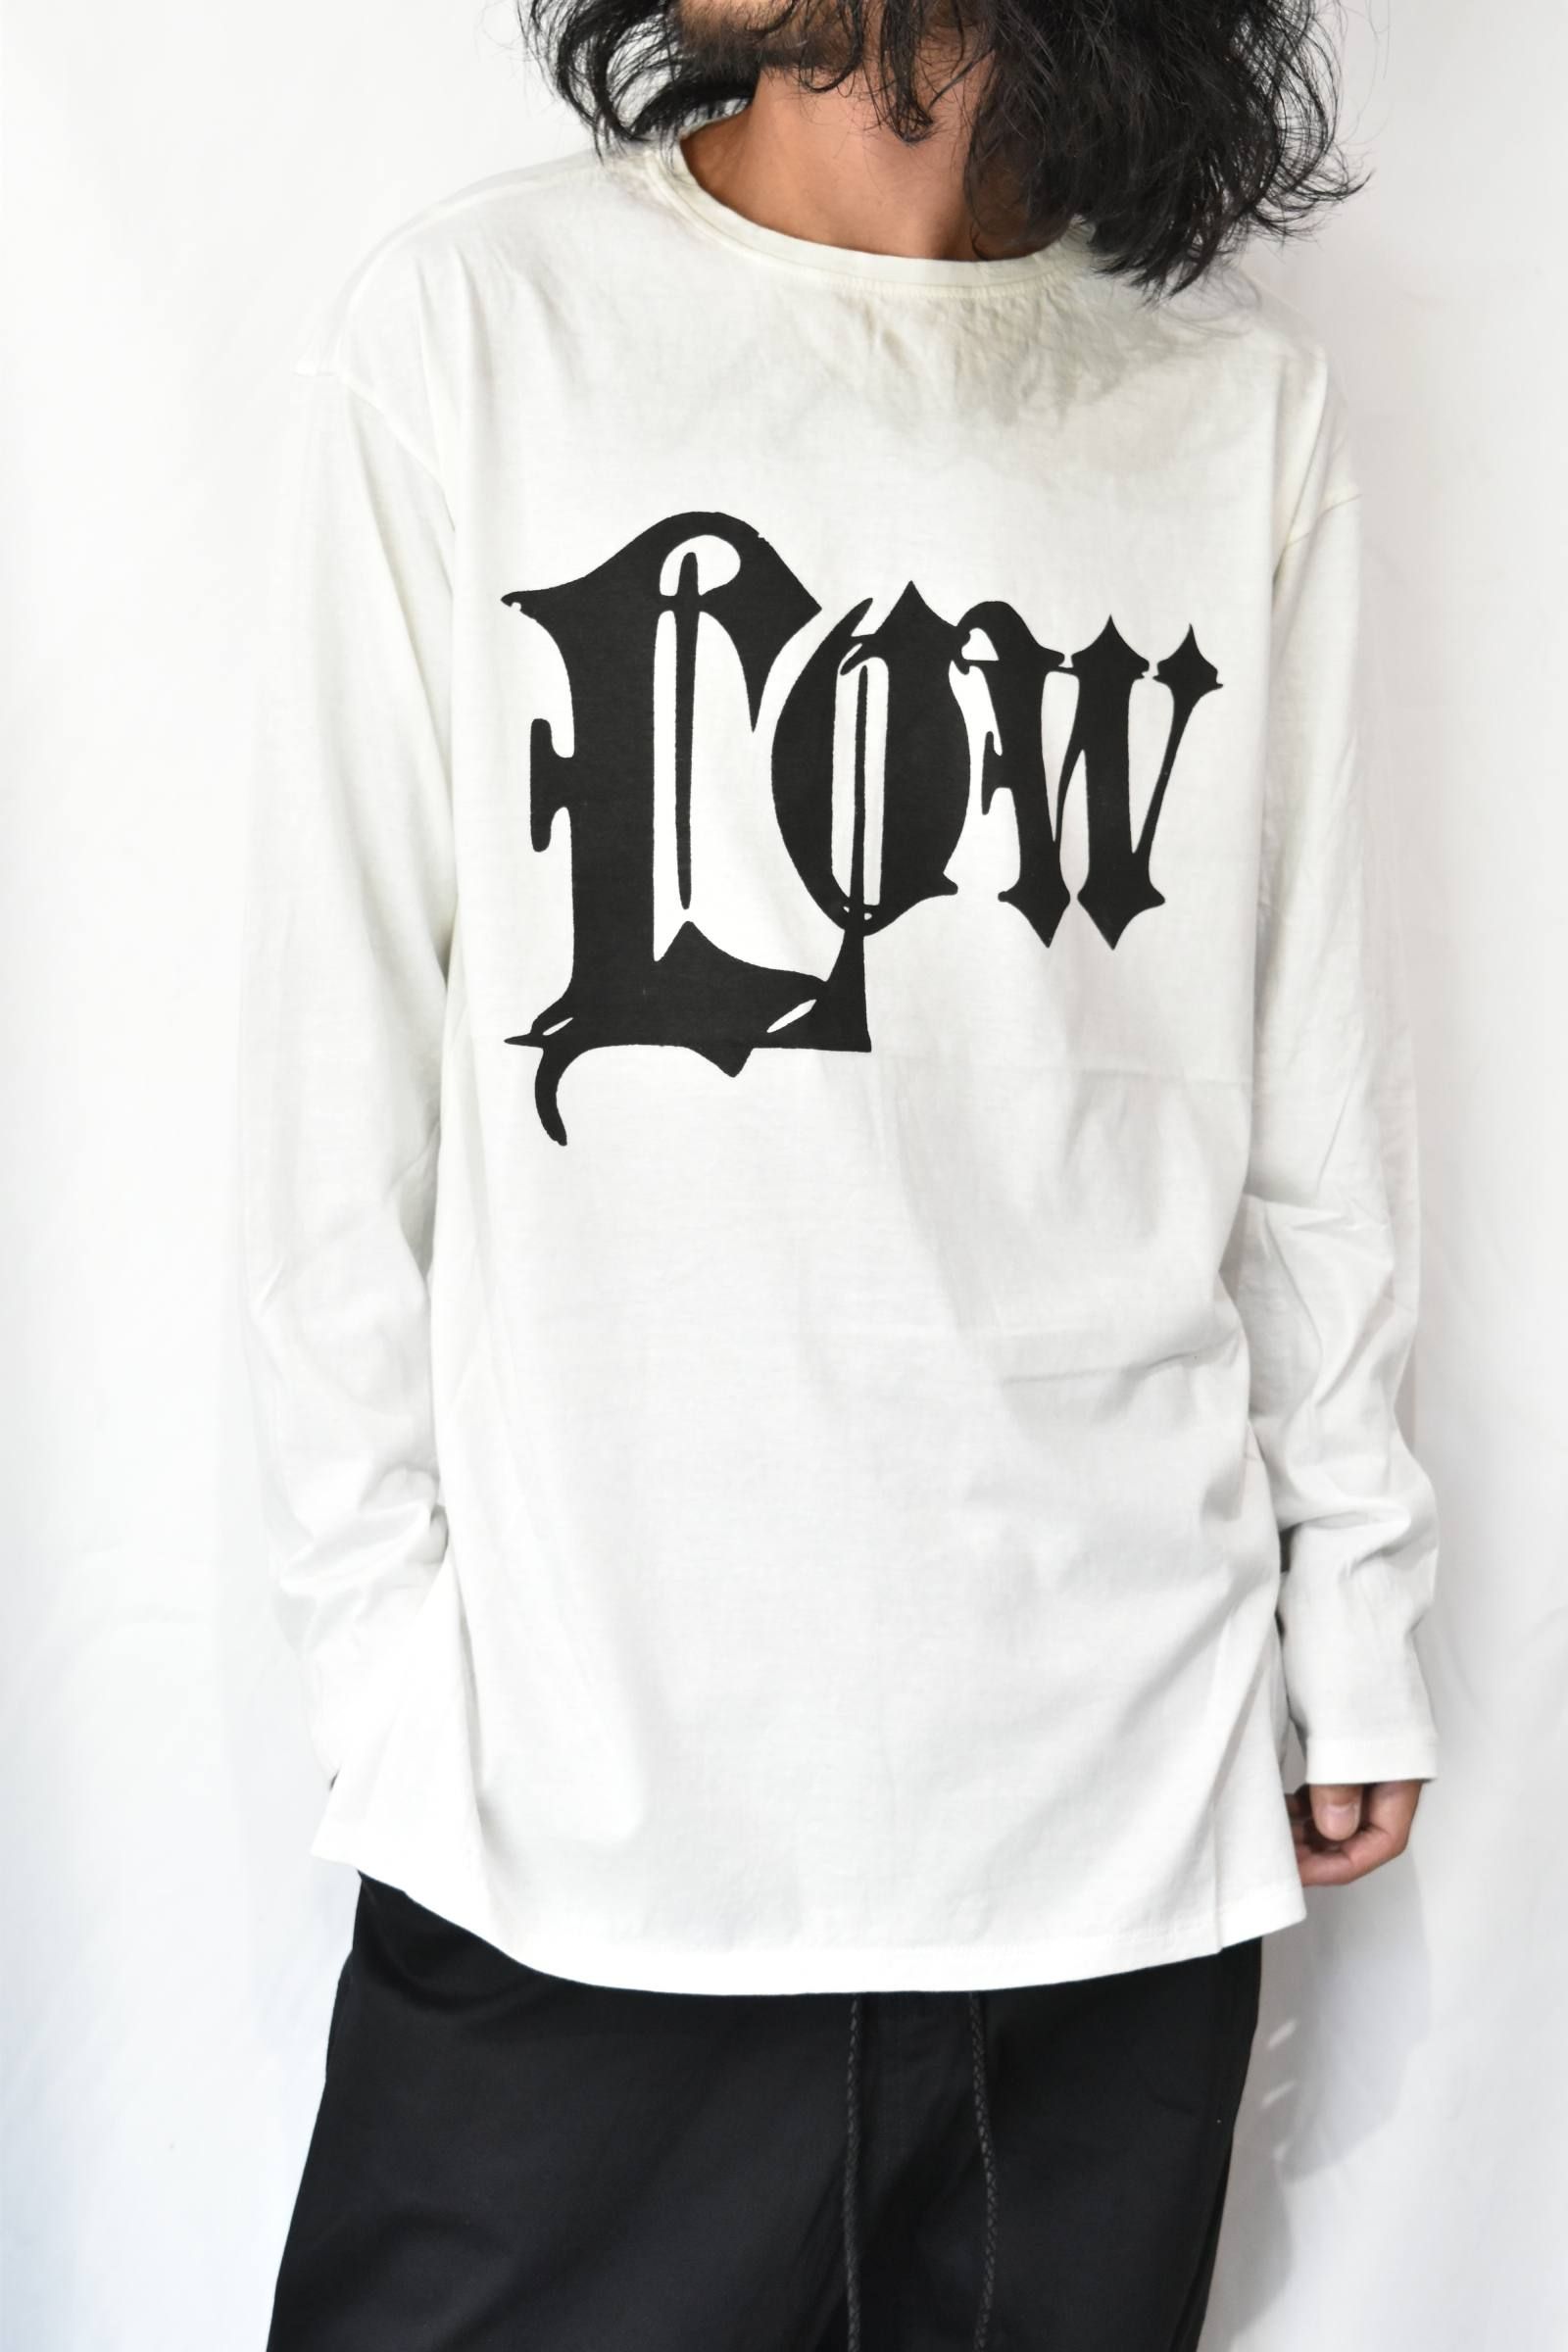 KMRii - Low_cut / LS (White) | chord online store